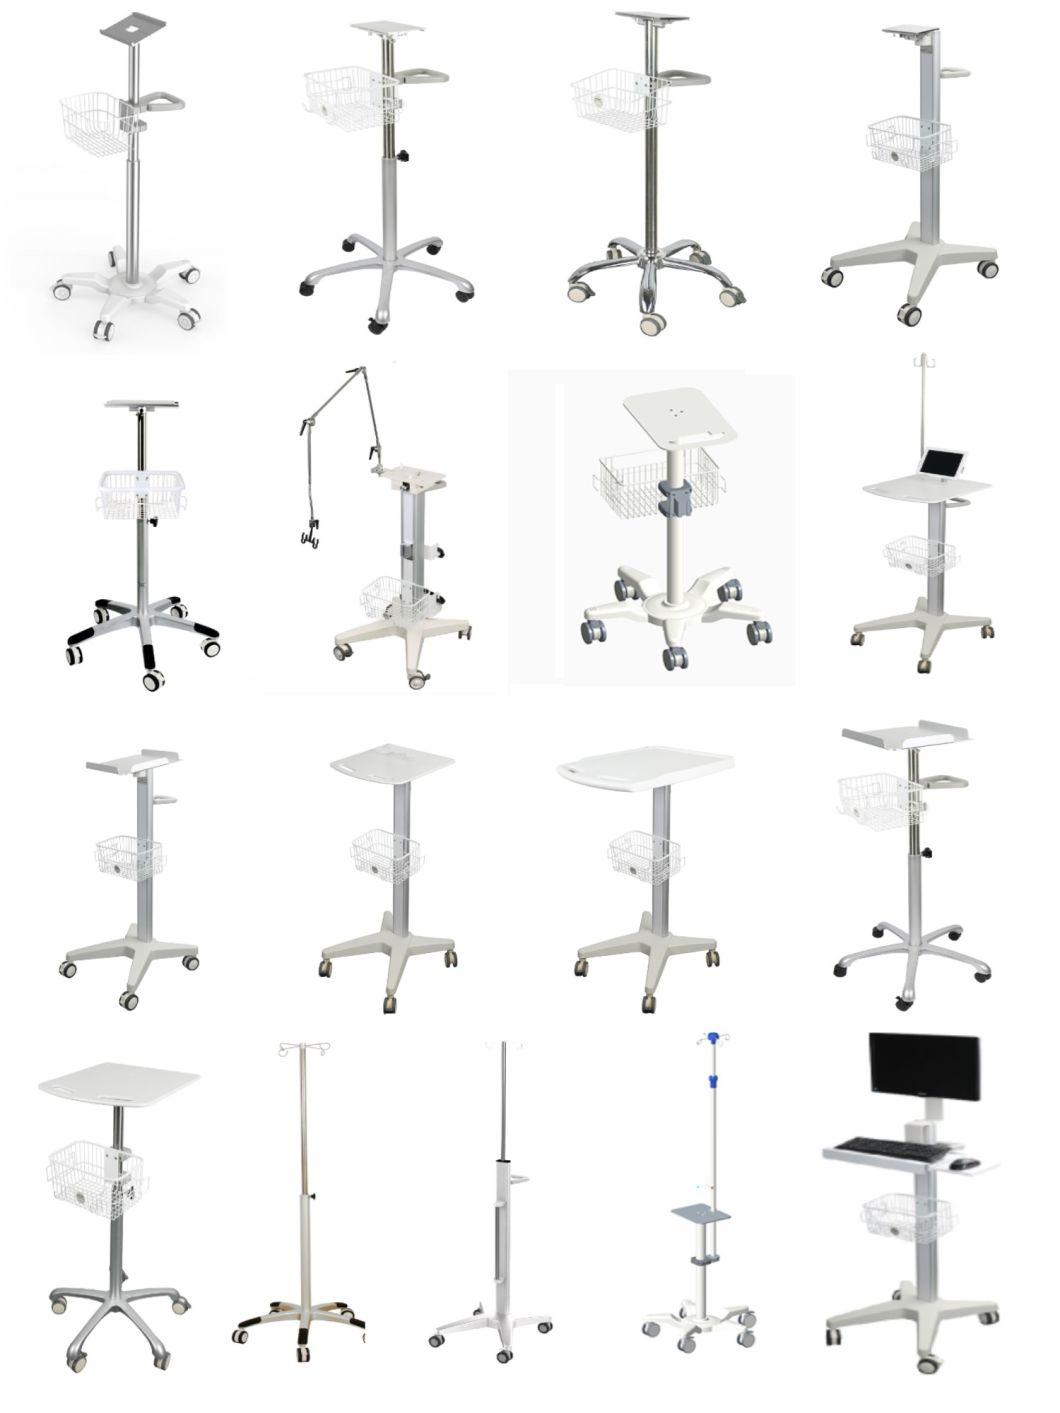 Hospital Trolley Medical Mobile Workstation Medical Equipment Cart Computer Laptop IV Pole Trolley Factory Roll Stand